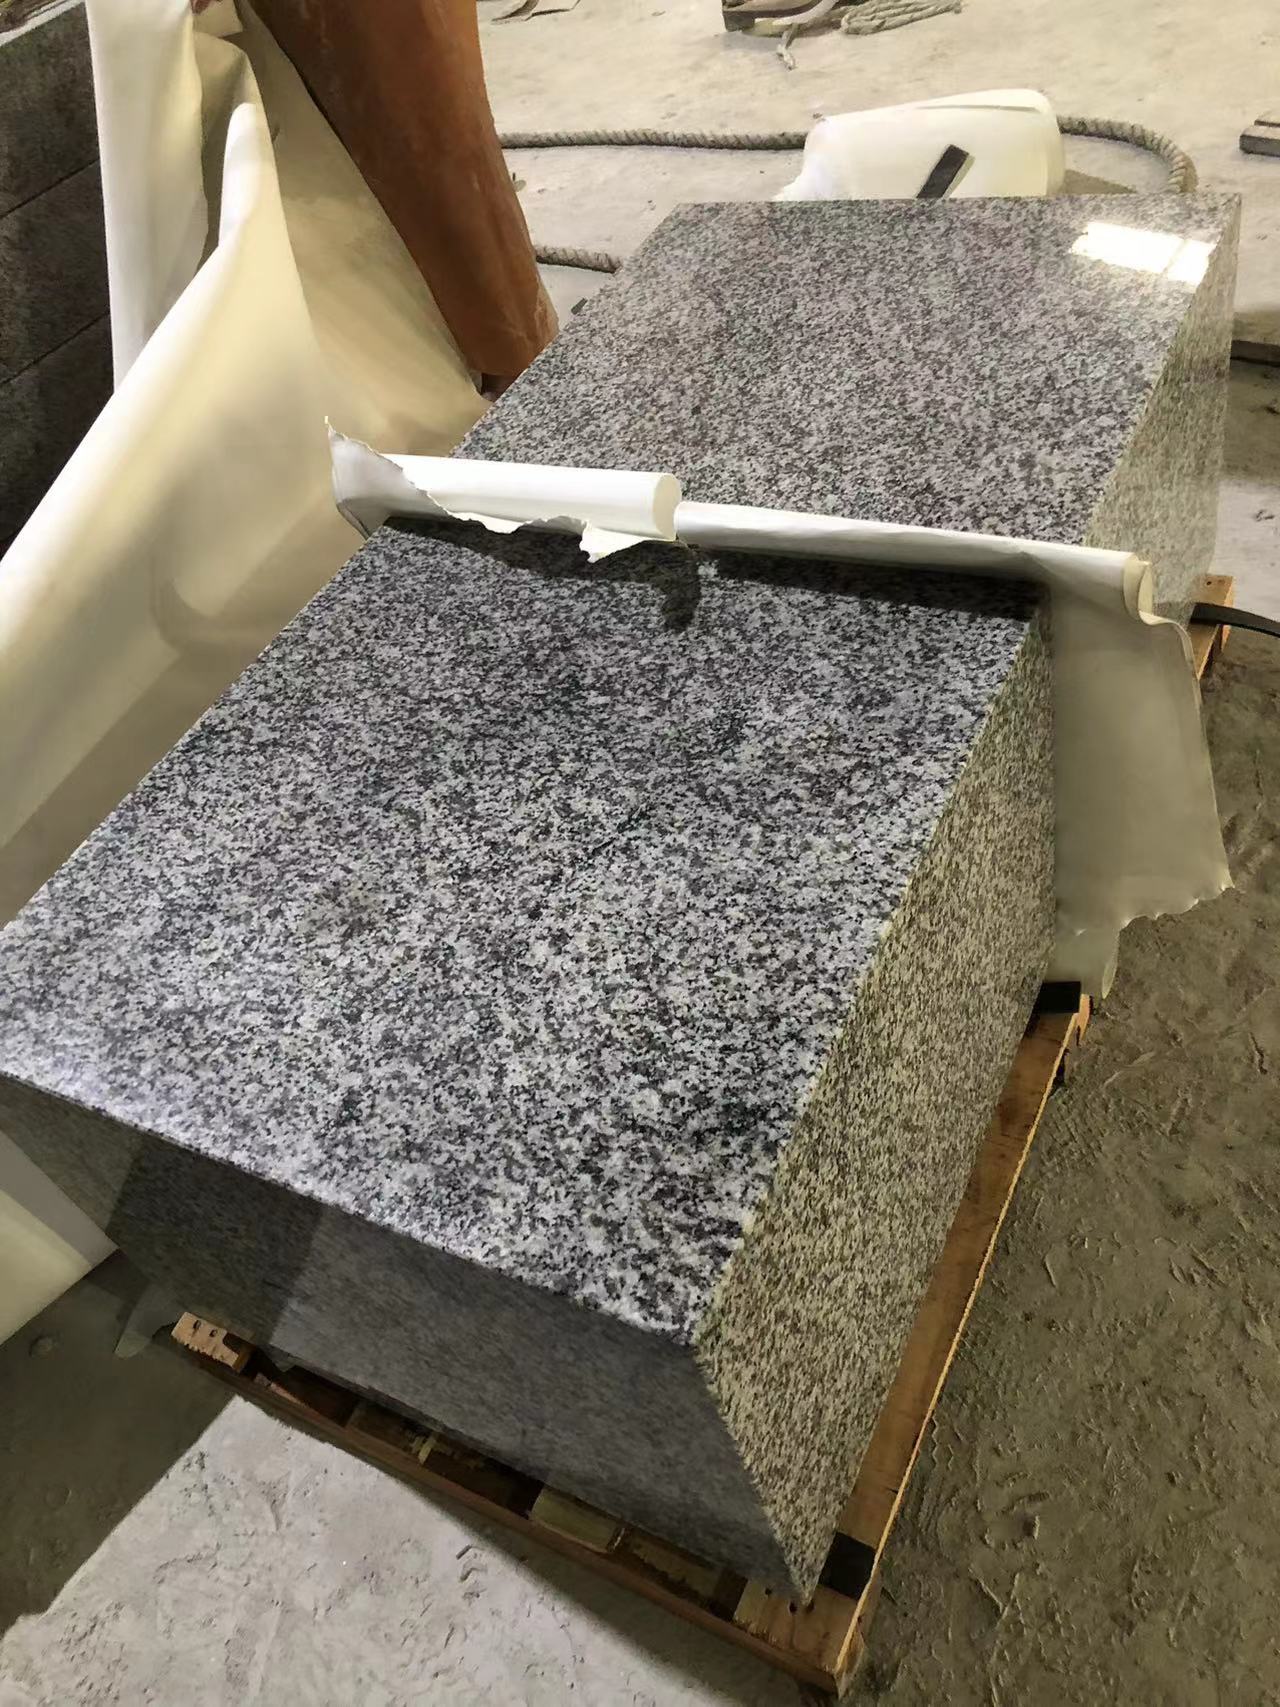 Silver grey G603 granite polished guarden bench